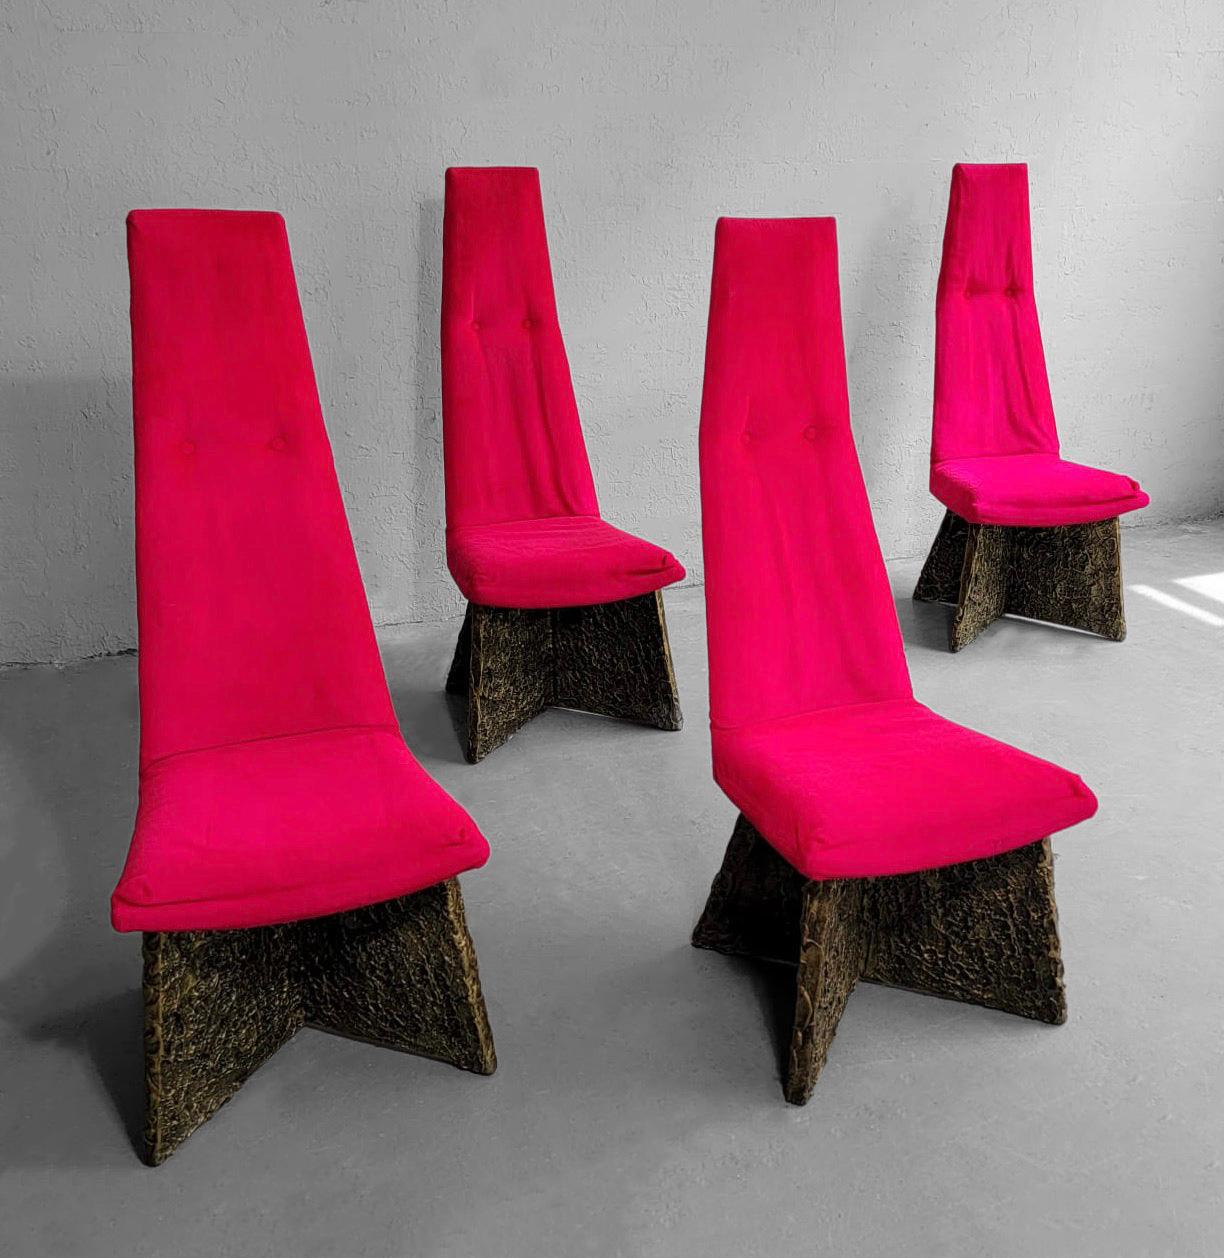 Set of 4, impressive, midcentury, brutalist dining or side chairs by Adrian Pearsall feature lipstick red velvet, contoured, high back seats with thick, black and bronze tone, resin over wood, x bases. Iconic, midcentury brutalist design.